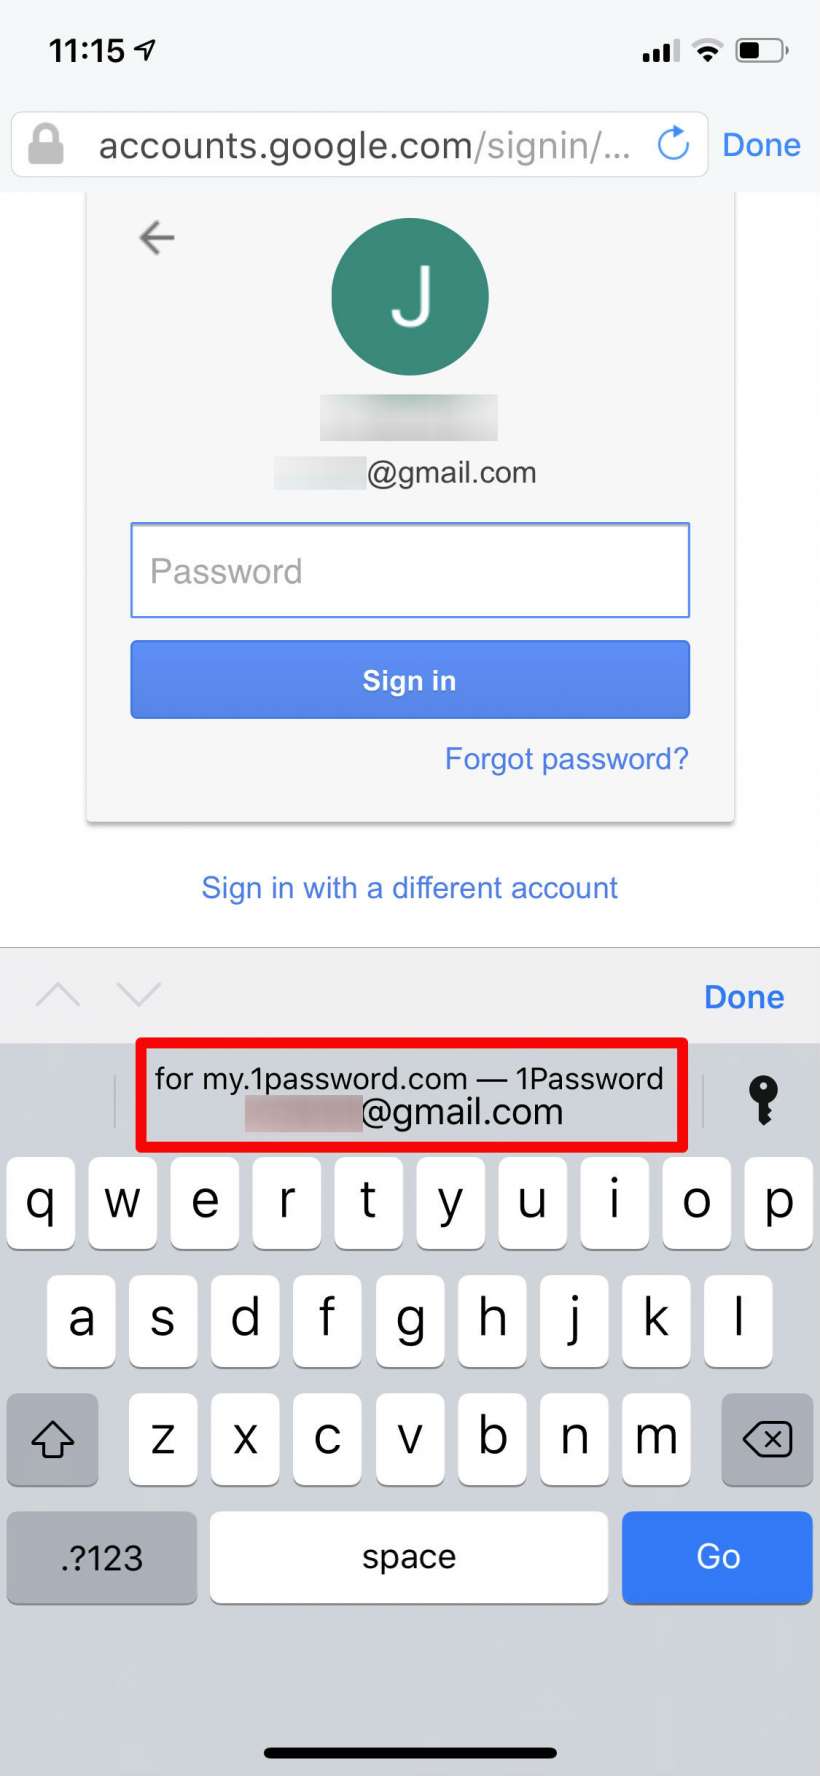 How to get started using 1Password to manage your logins and passwords on iPhone and iPad and Mac.